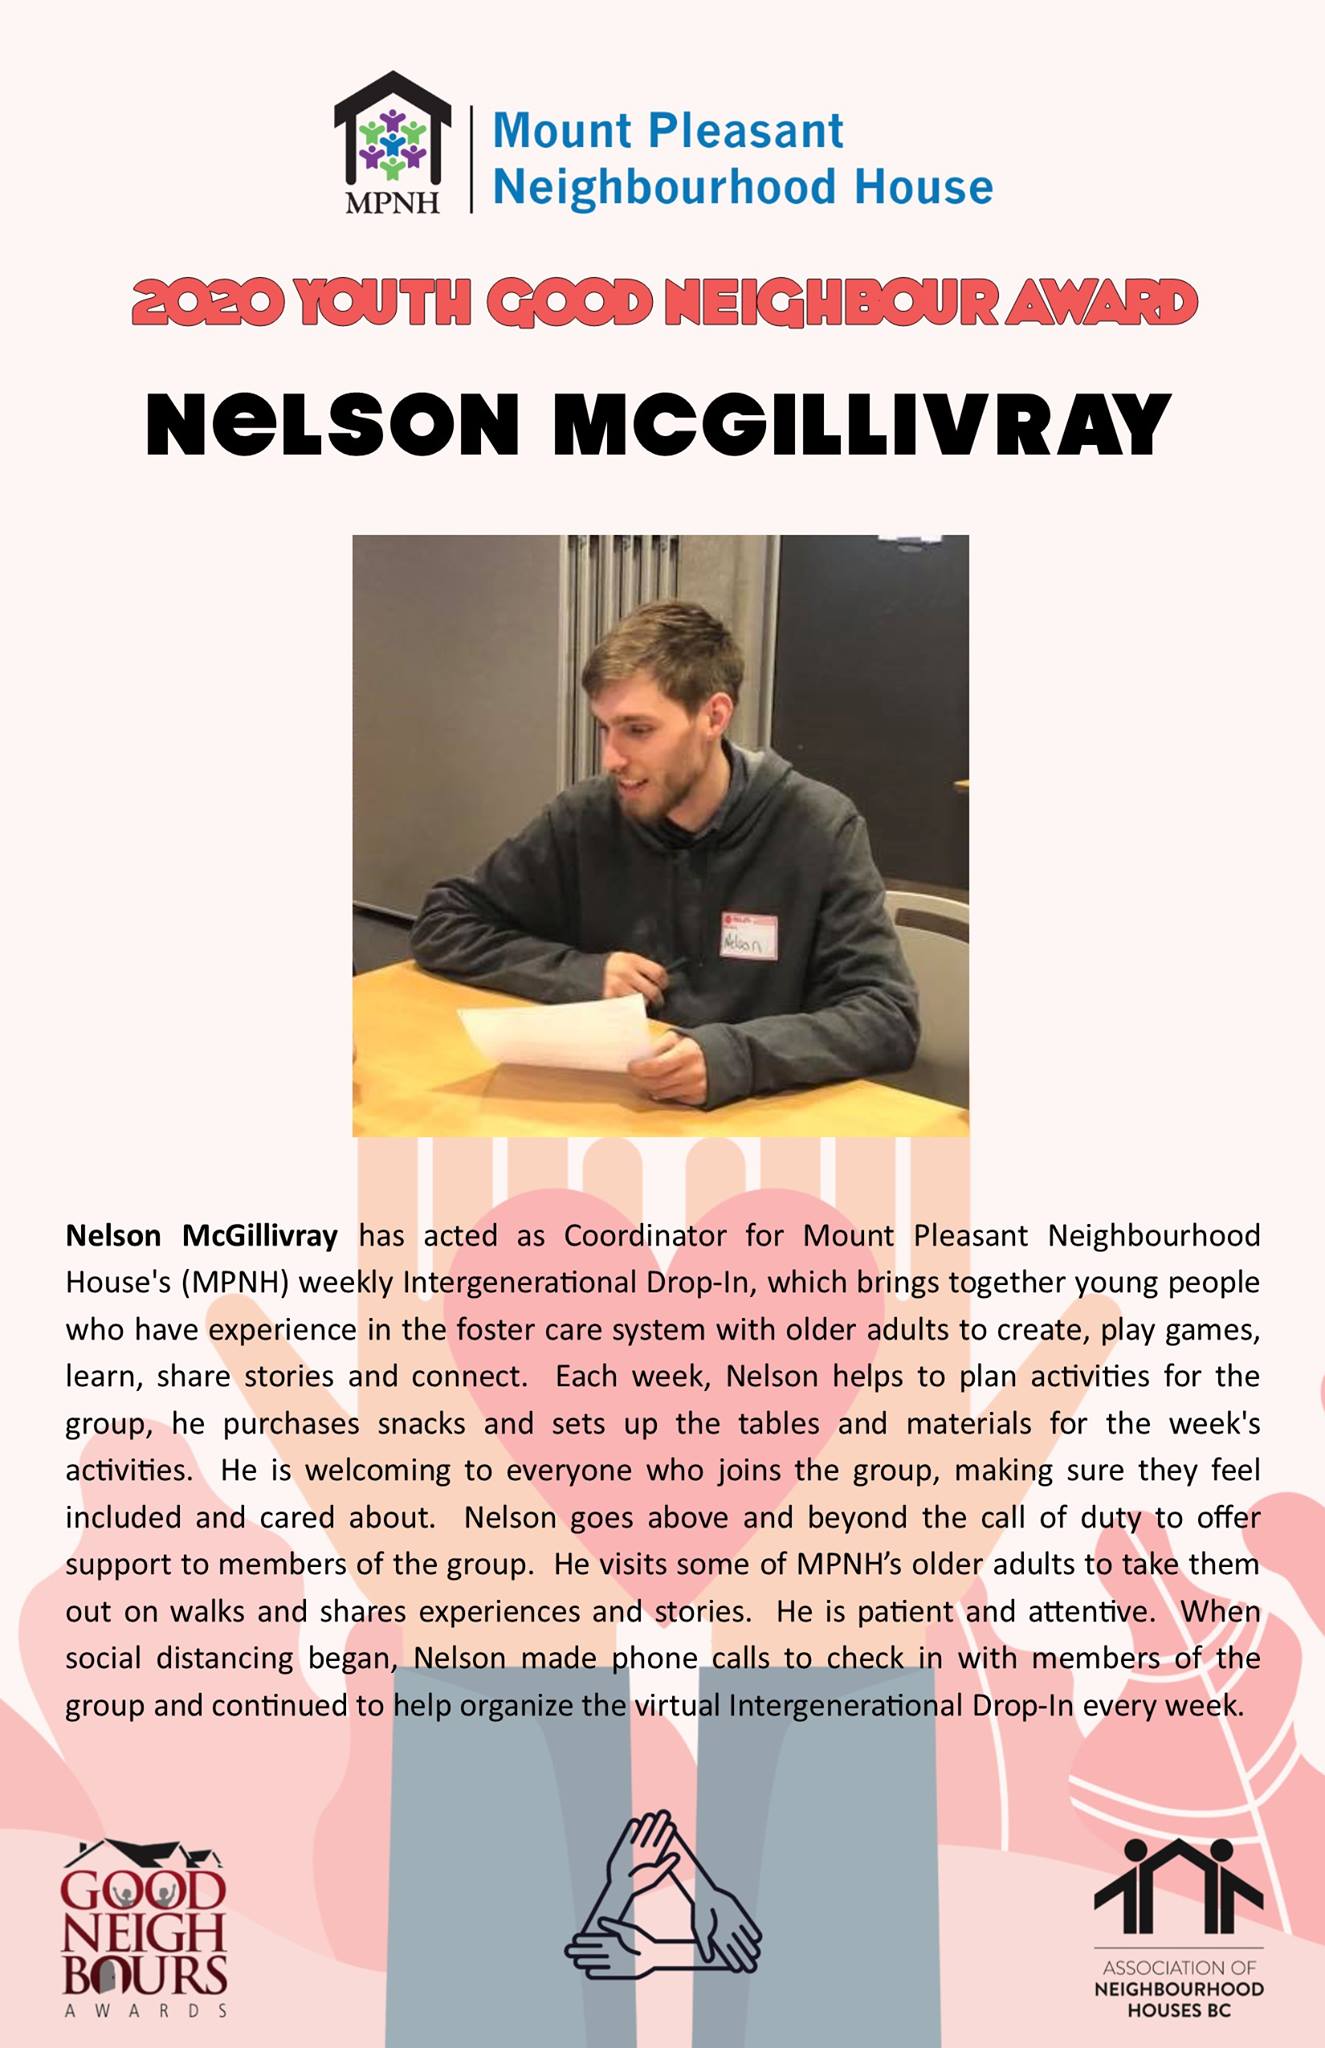 Nelson McGillivray has received the 2020 Youth Good Neighbour Award for his service to Mount Pleasant Neighbourhood House.